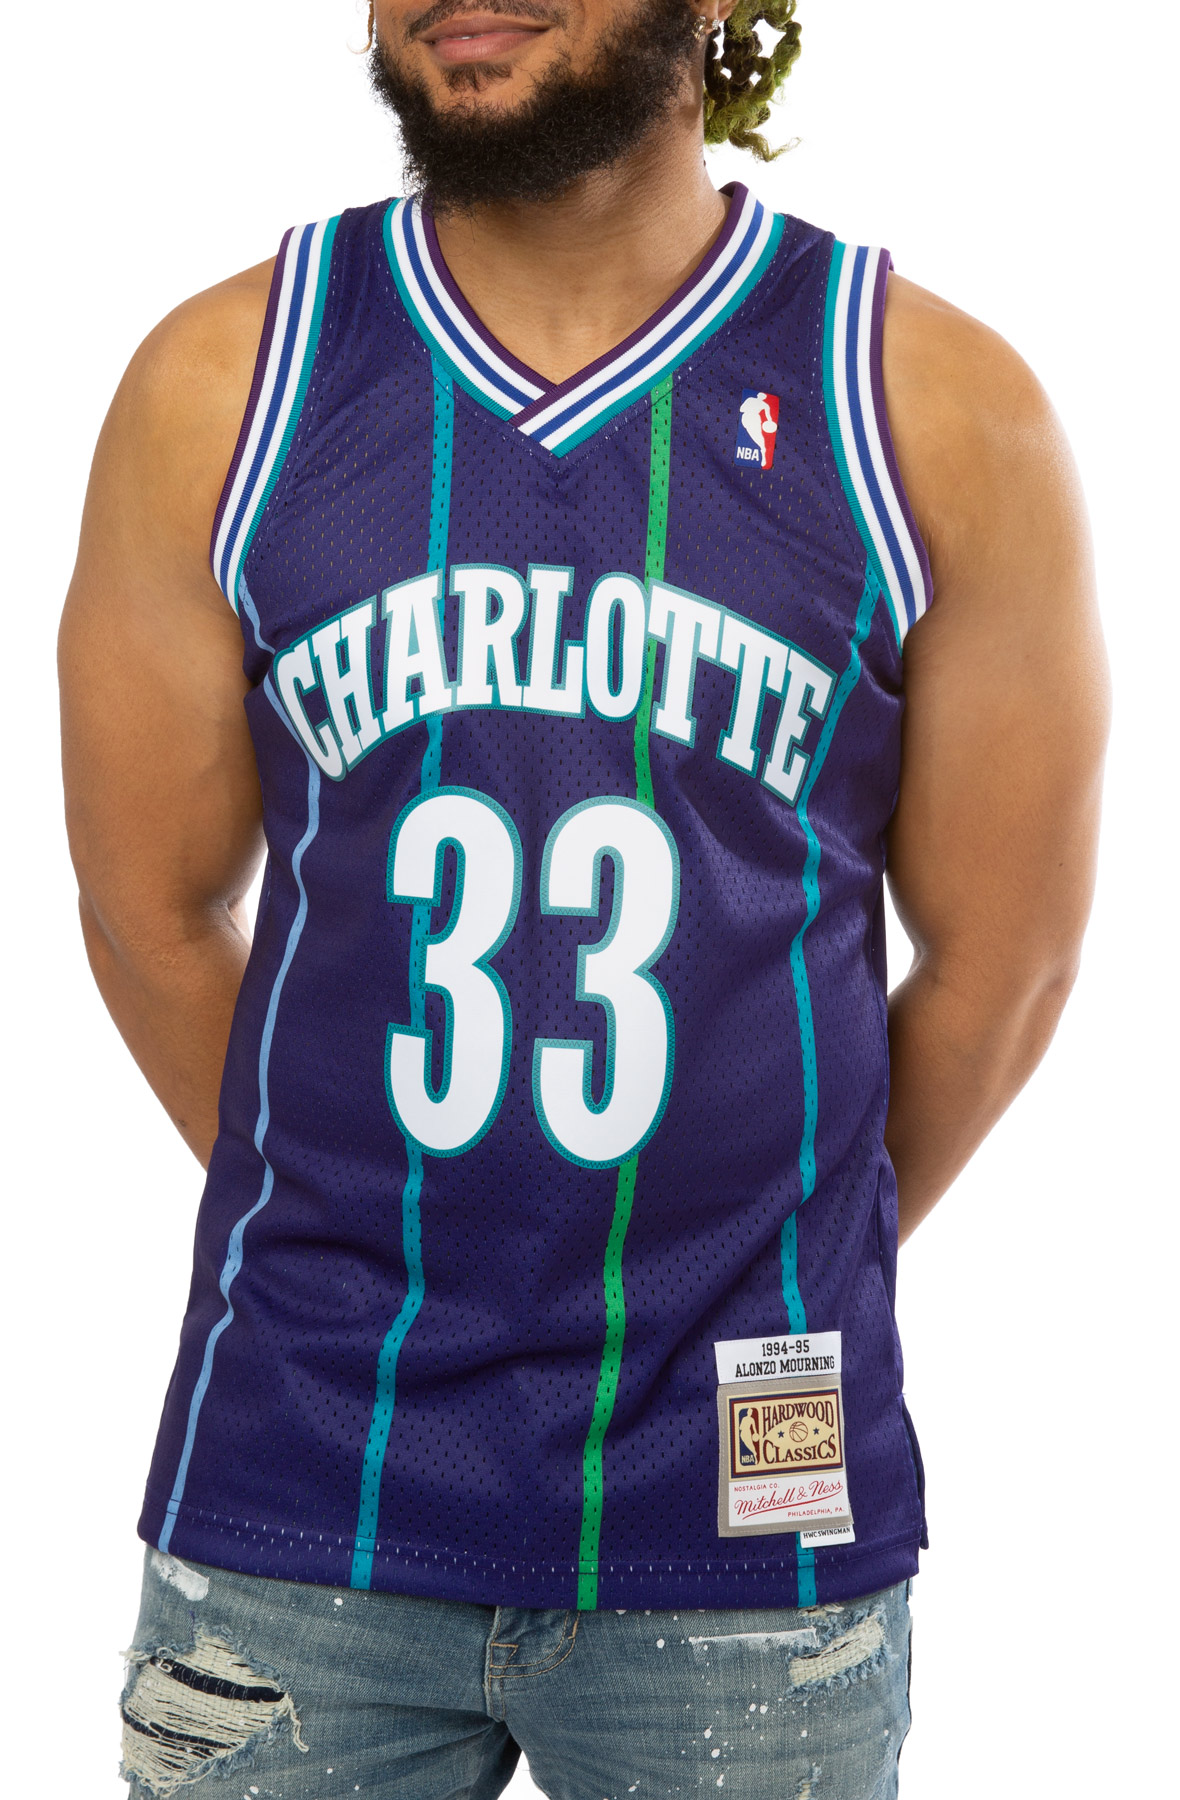 Alonzo Mourning 1992-93 Authentic Jersey Charlotte Hornets Mitchell & Ness  Nostalgia Co.